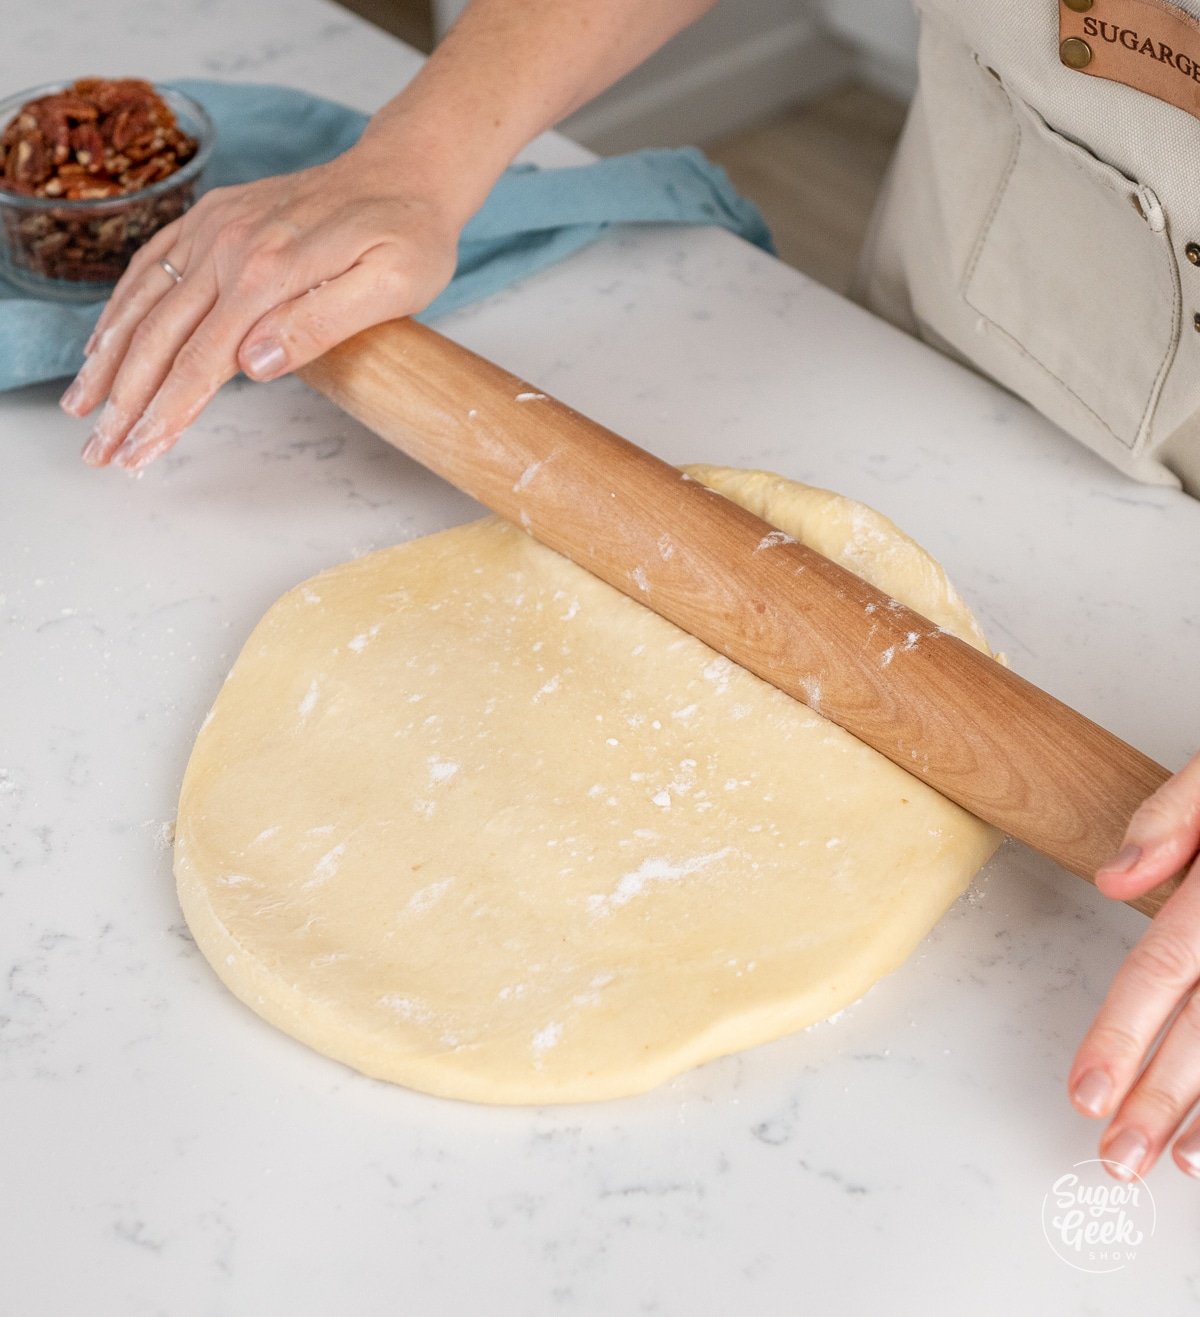 hands rolling out dough with a wooden rolling pin